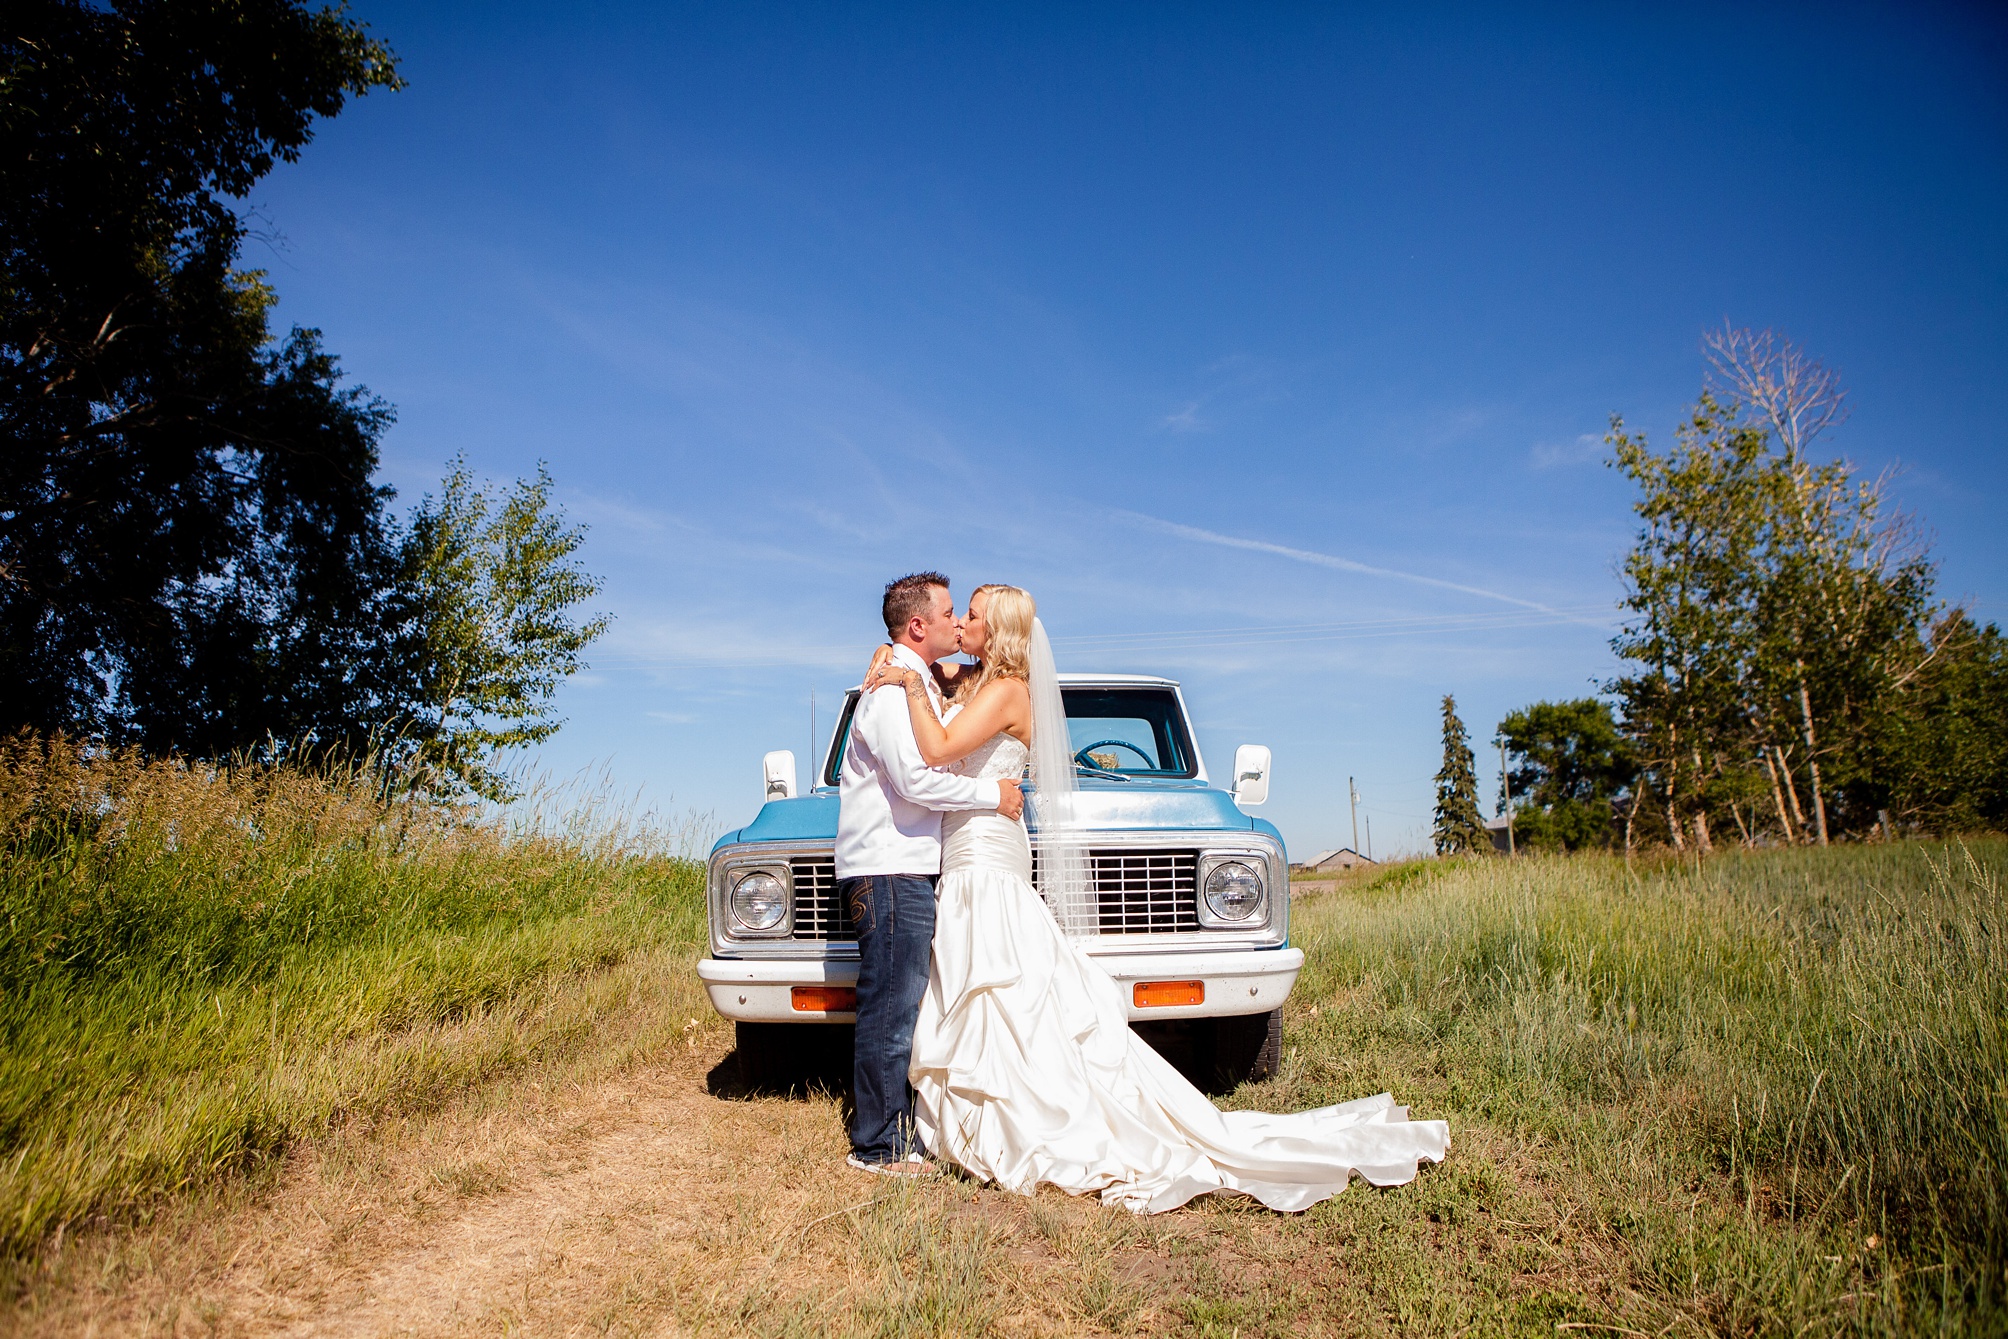 August wedding in Readymade by Kinsey Holt Photography, with blue vintage truck